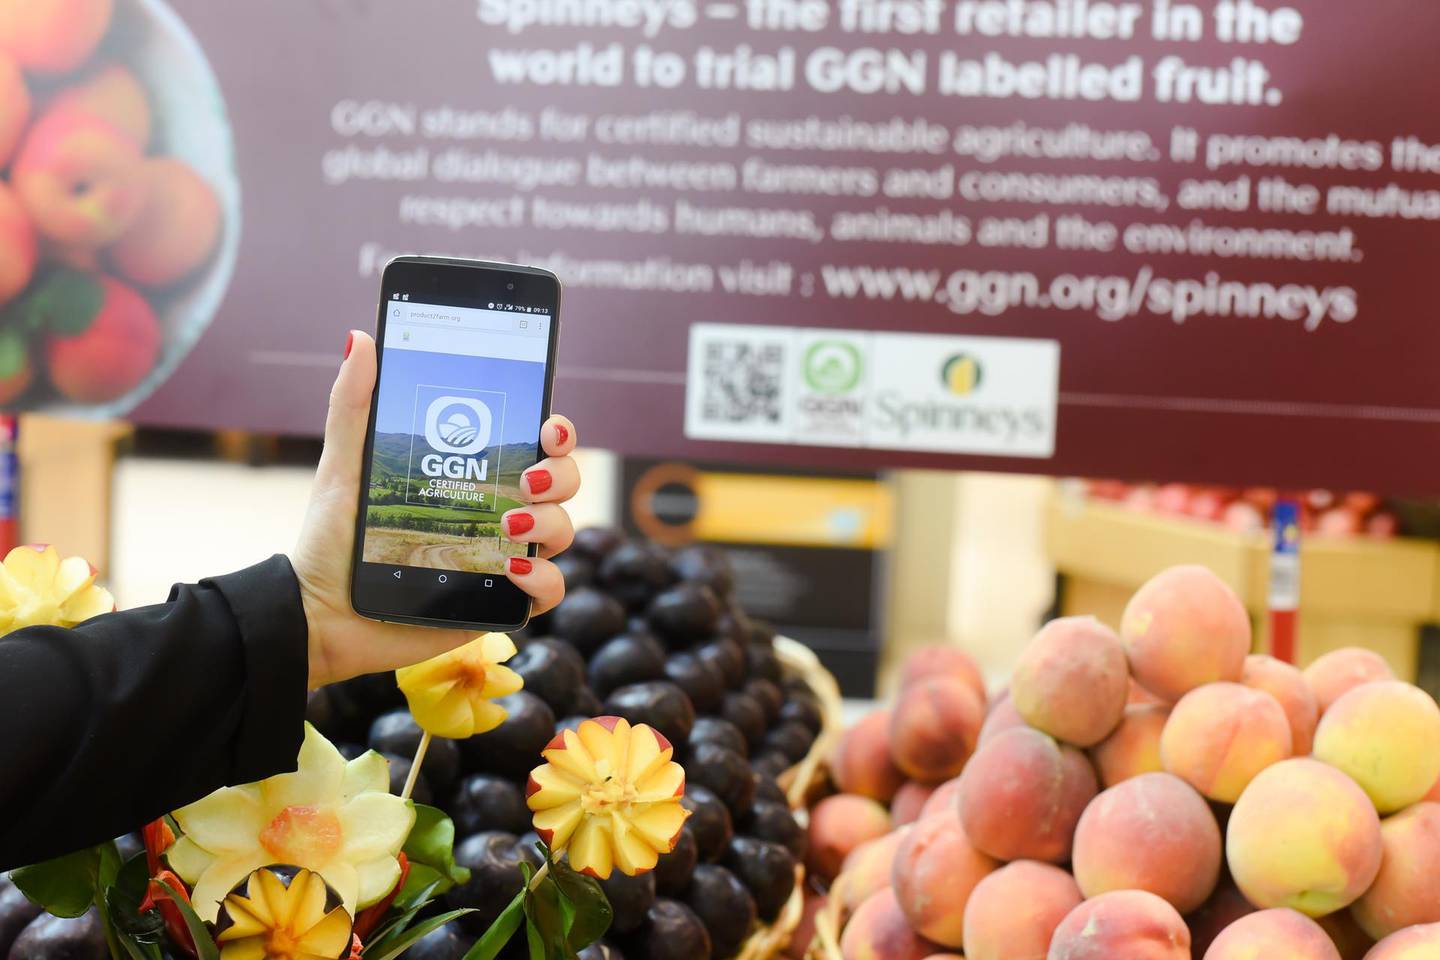 Spinneys is trialing a new food labeling system that allows customers to see exactly where and how their food was grown